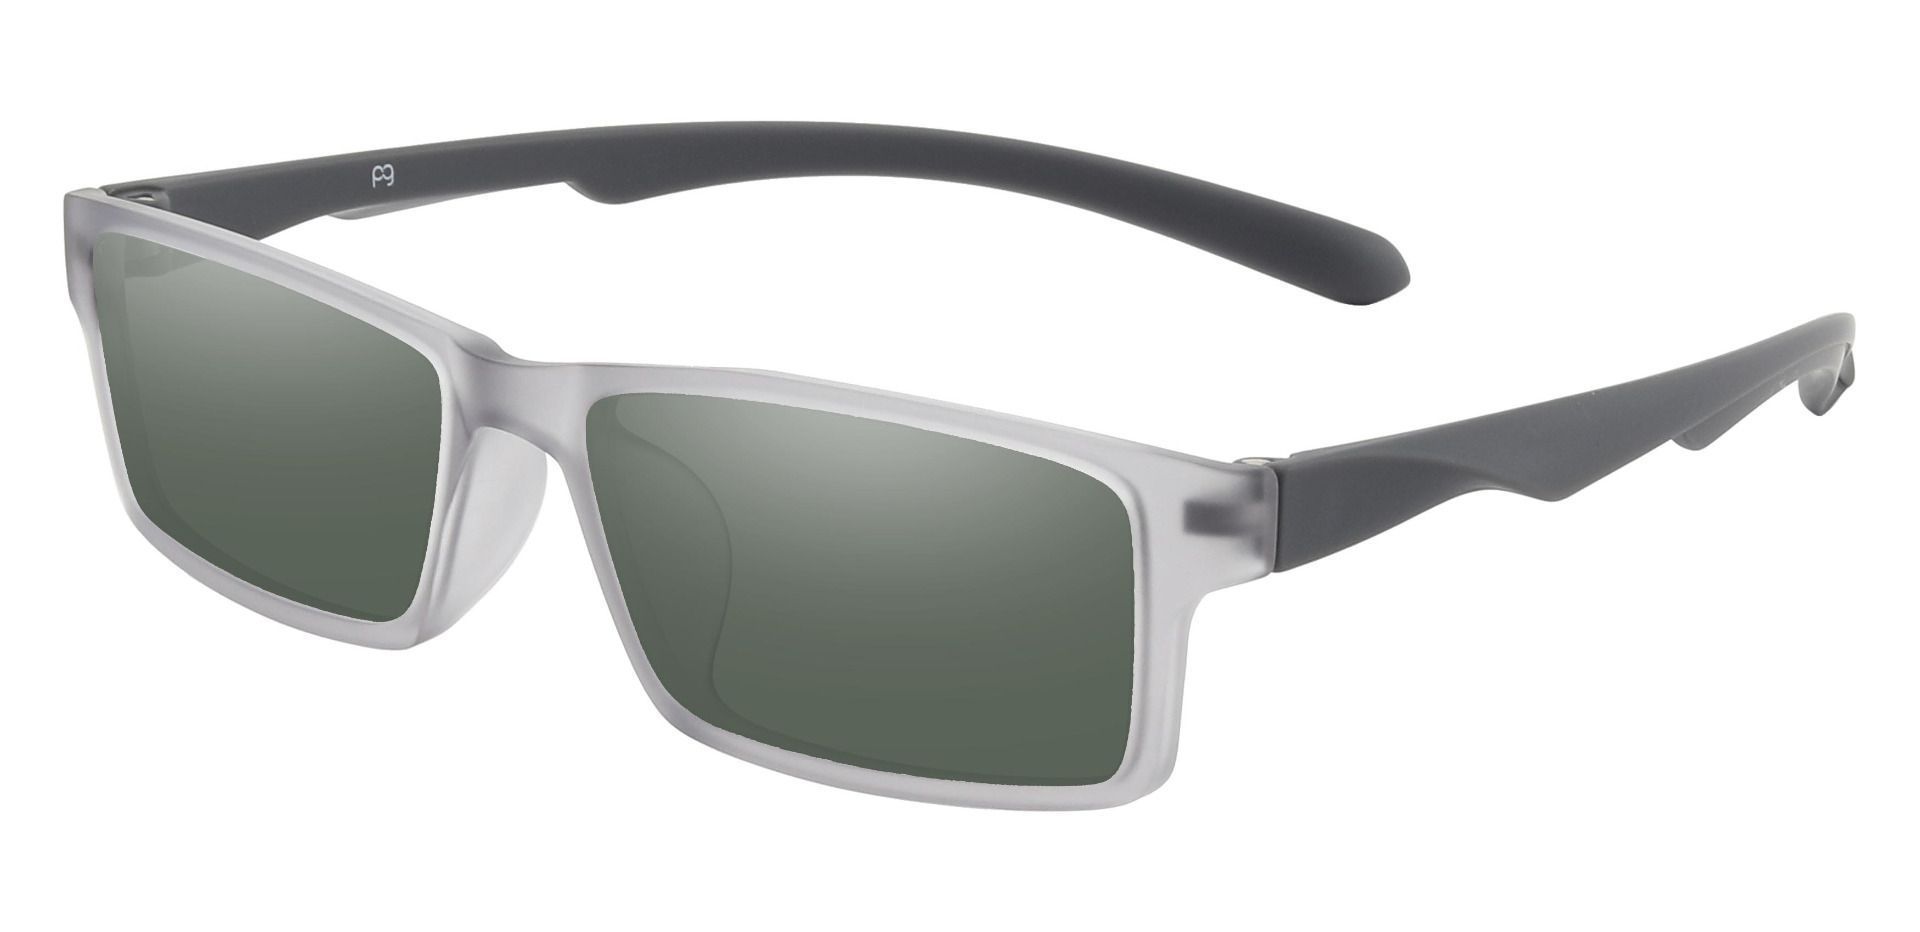 Walsh Rectangle Reading Sunglasses - Gray Frame With Green Lenses